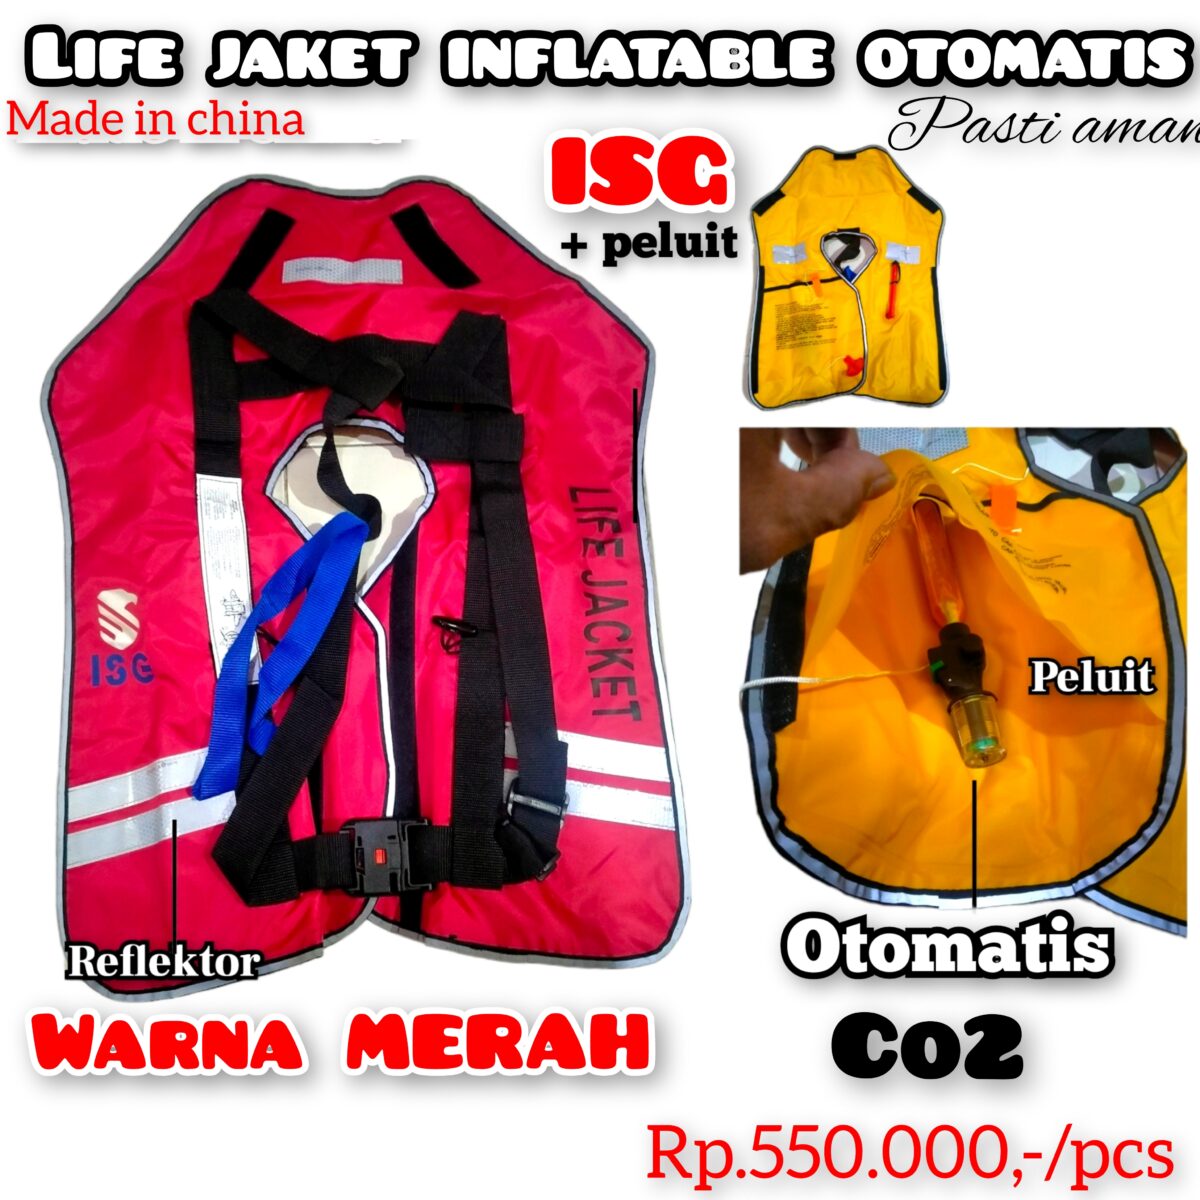 Pelampung inflatable otomatis co2 tabung